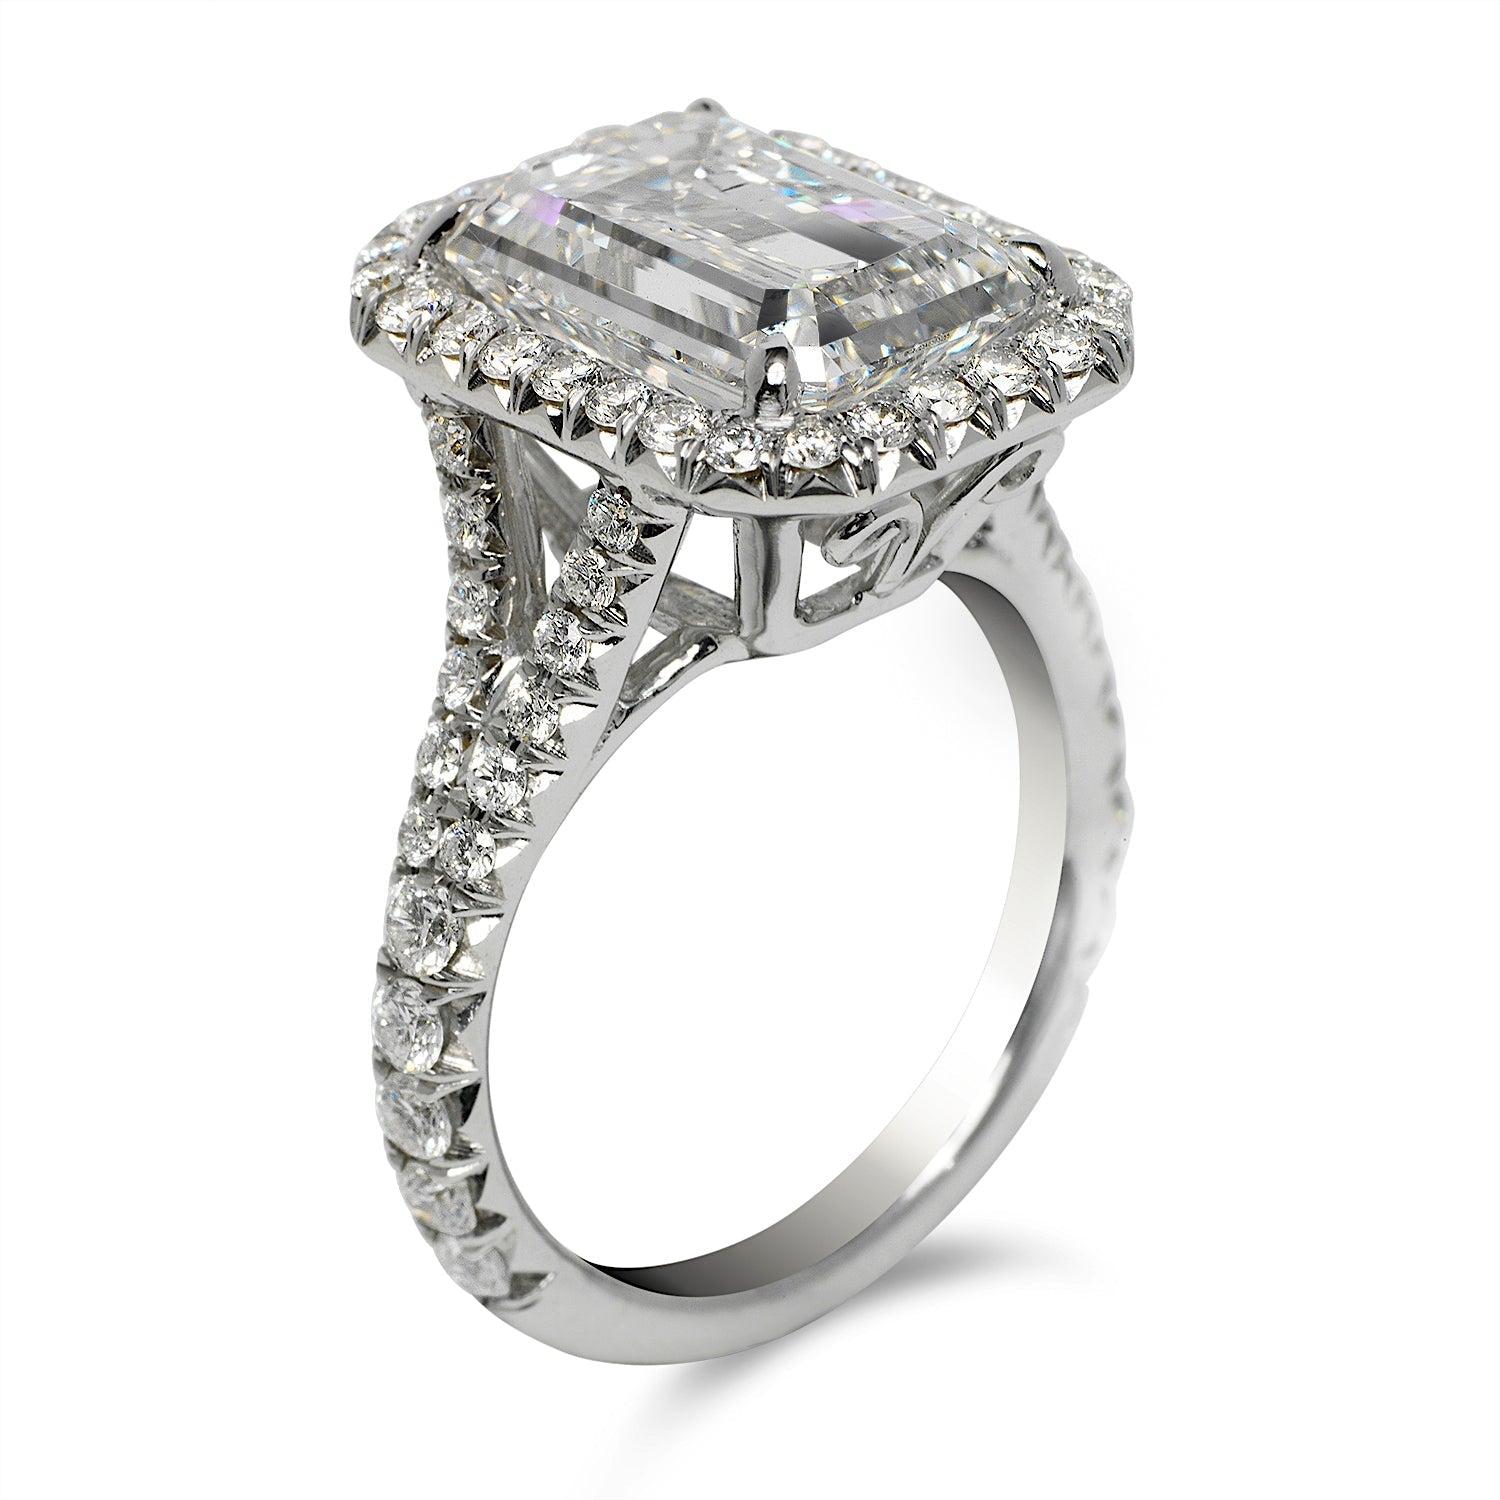 4 Carat Emerald Cut Diamond Engagement Ring GIA Certified F SI1 In New Condition For Sale In New York, NY